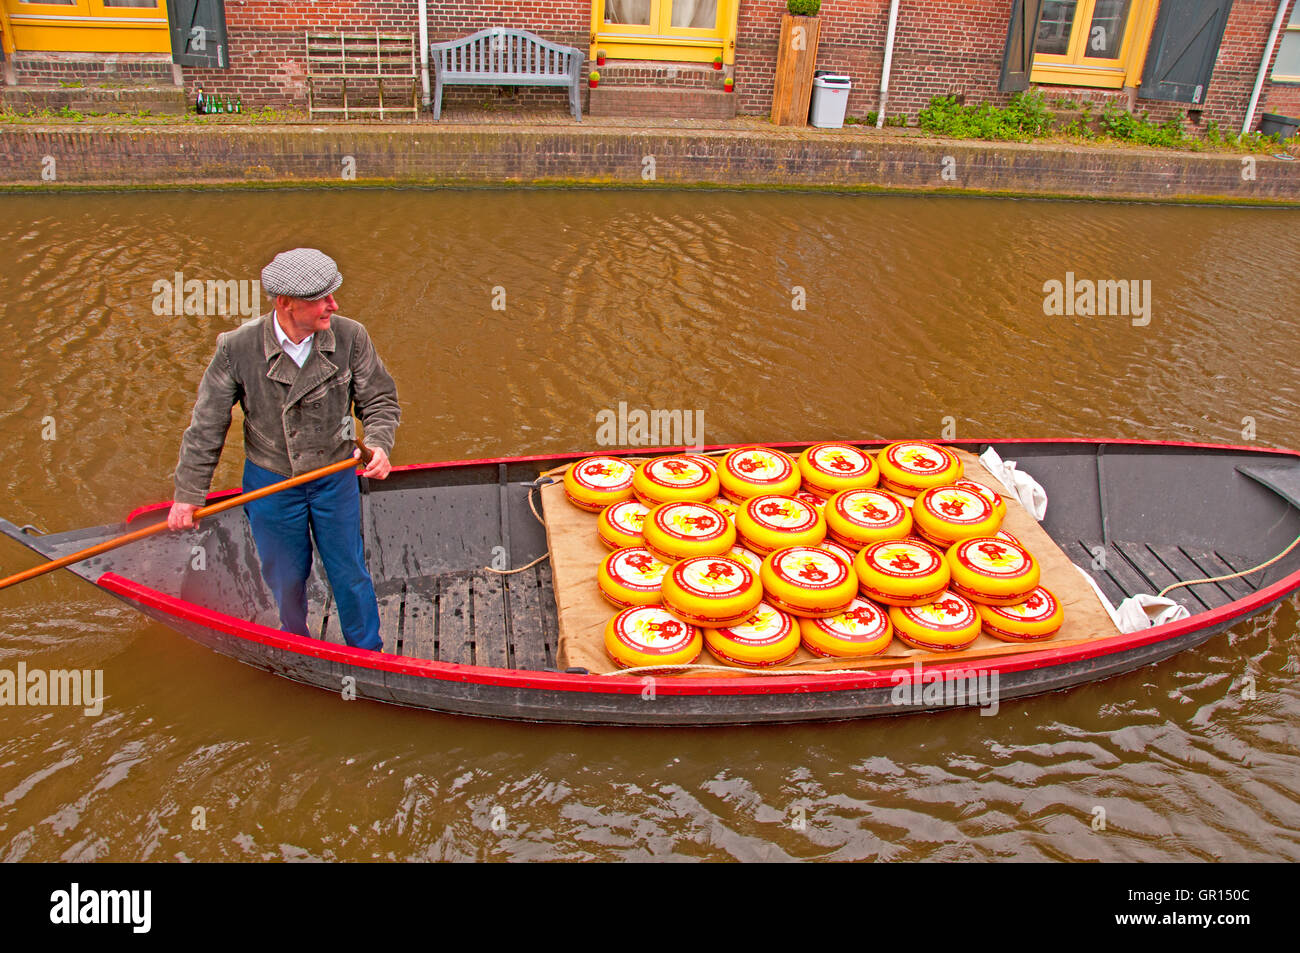 A local citizen transports rounds of cheese down a canal during the Alkmaar Cheese Market, Holland Stock Photo